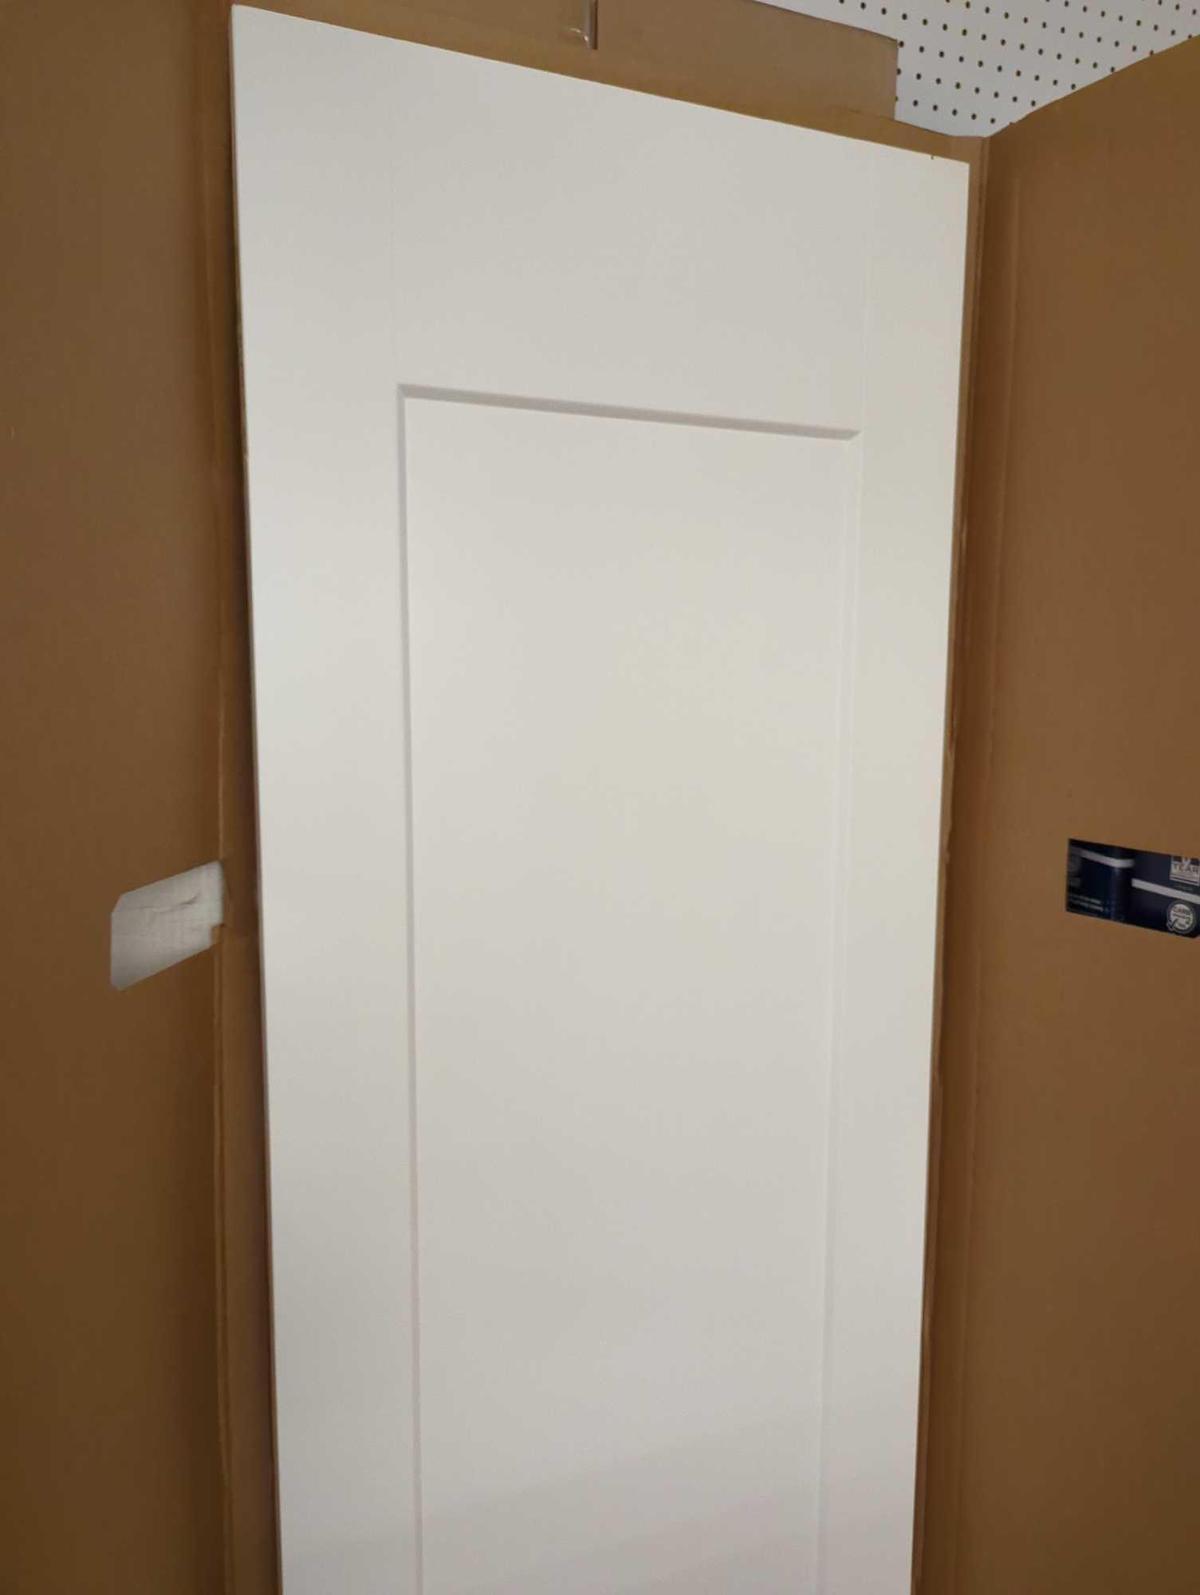 Painted Composite MDF 1 Panel Interior Barn Door Slab, White Primed. Comes in open box as is shown